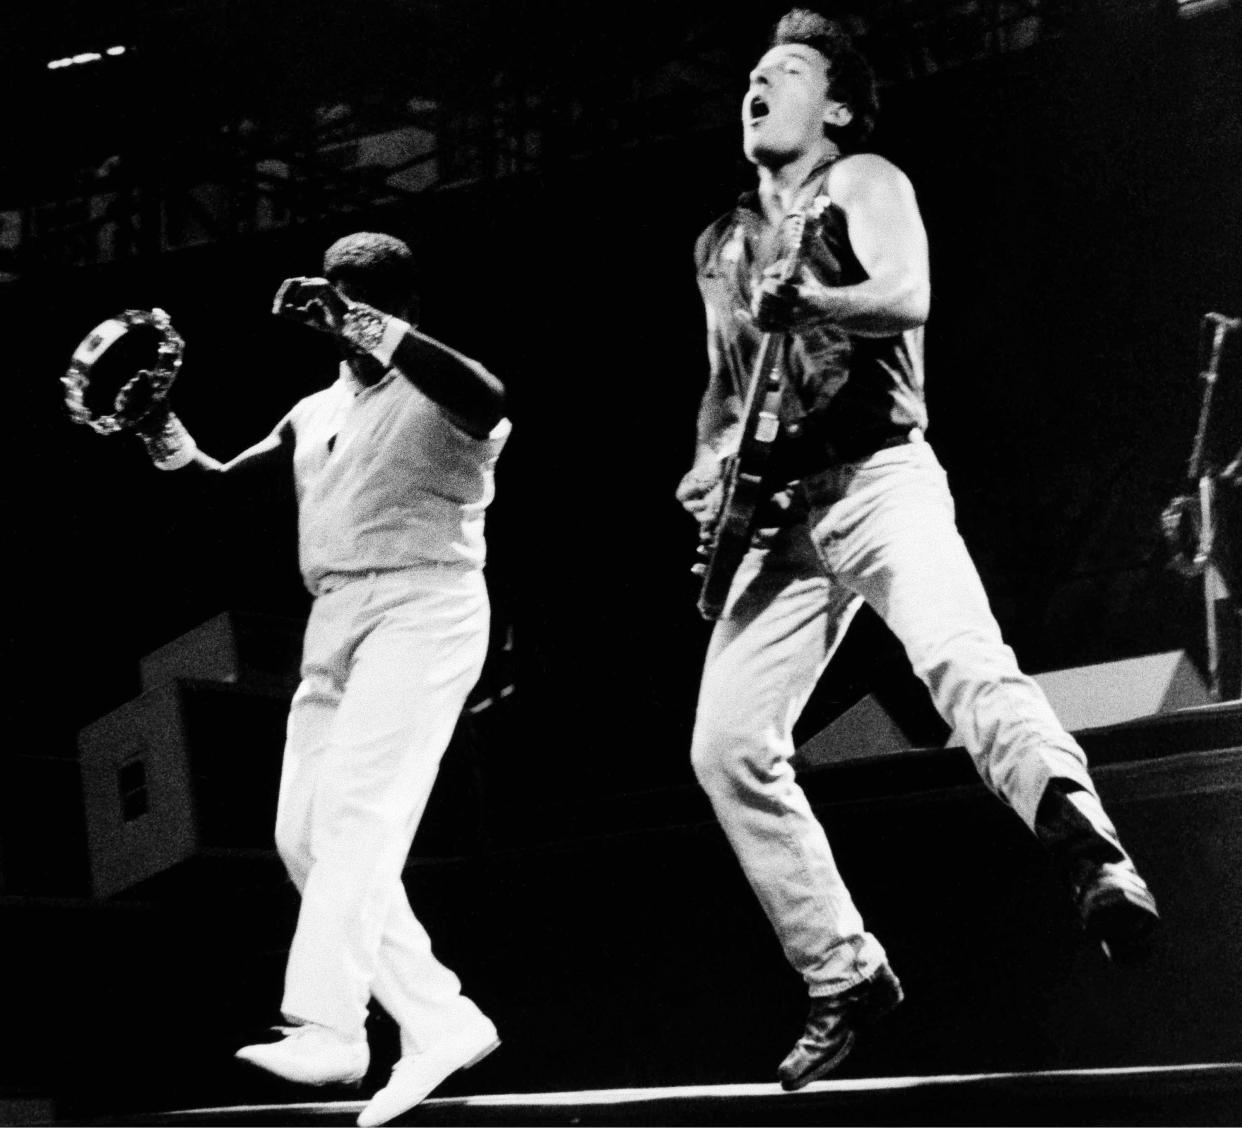 Bruce Springsteen lets loose during his sold-out concert on Aug. 6, 1985, at RFK Stadium in Washington. The concert is the first in a nine-week, 25-city tour of North America for Springsteen.